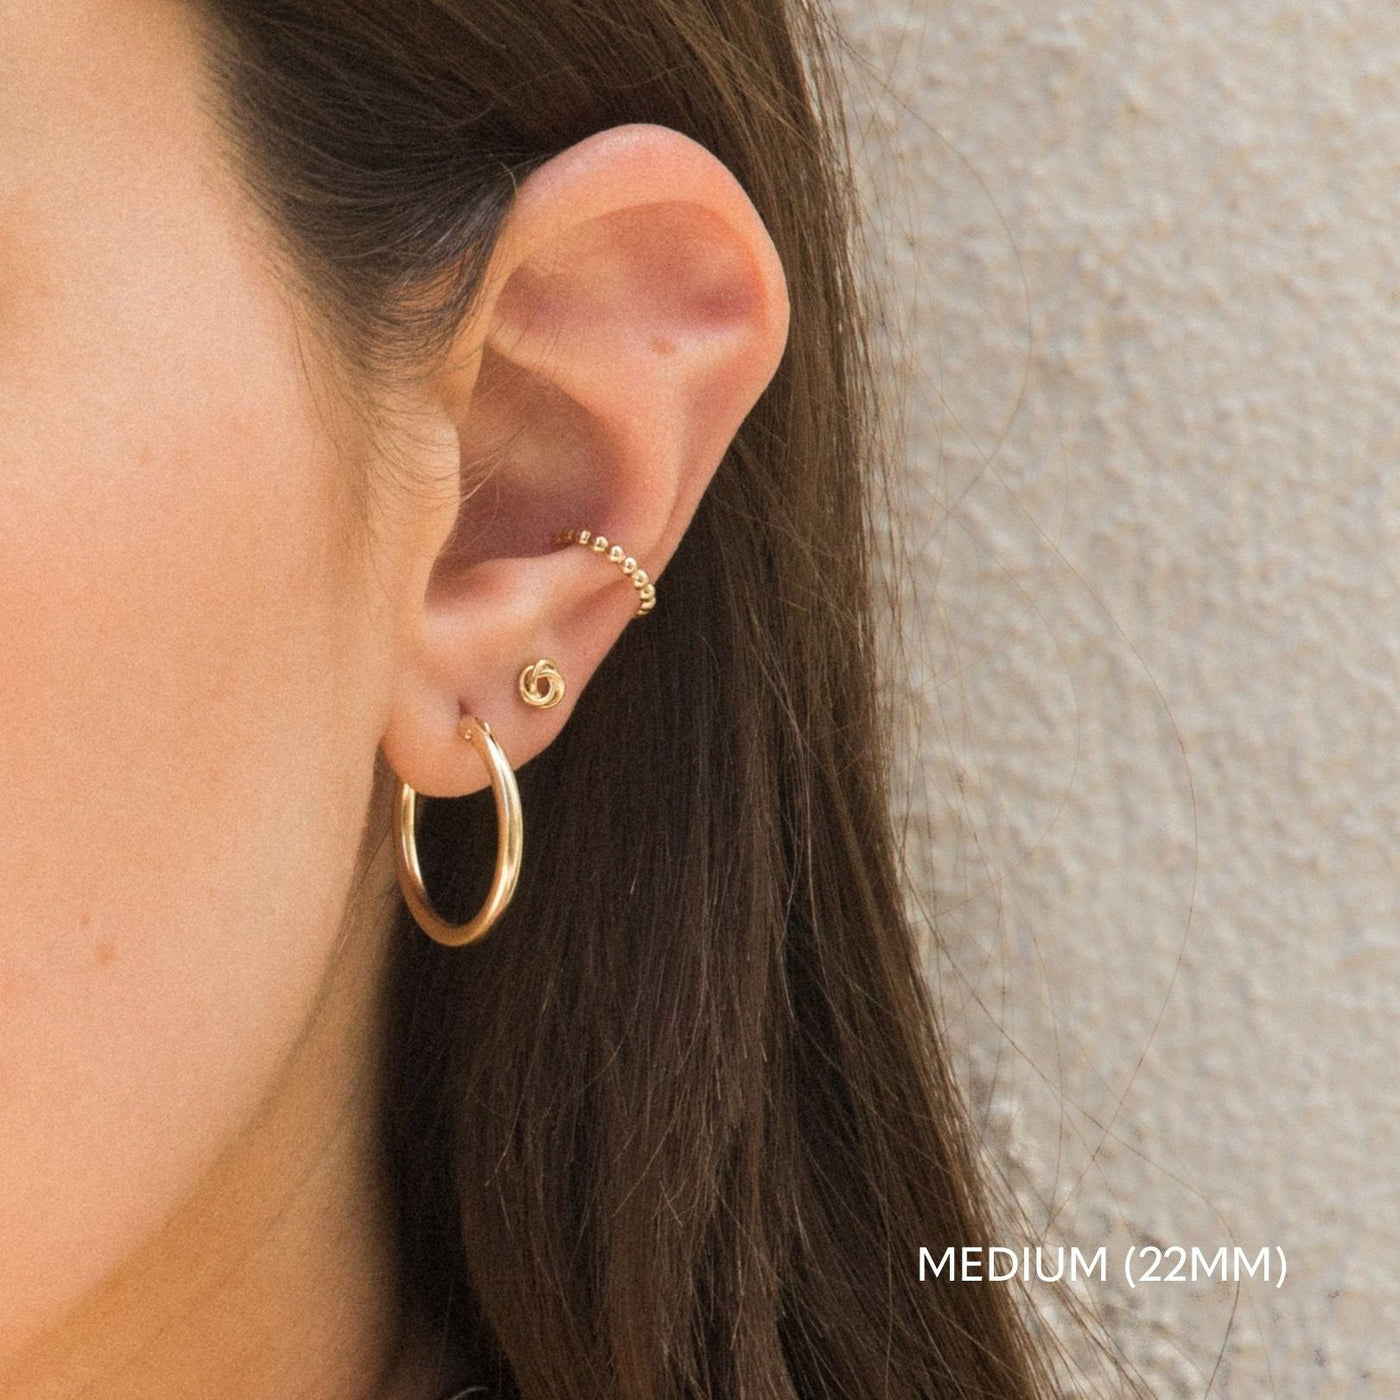 Shop the Best Hoop Earrings—No Jewelry Box Is Complete Without a Pair